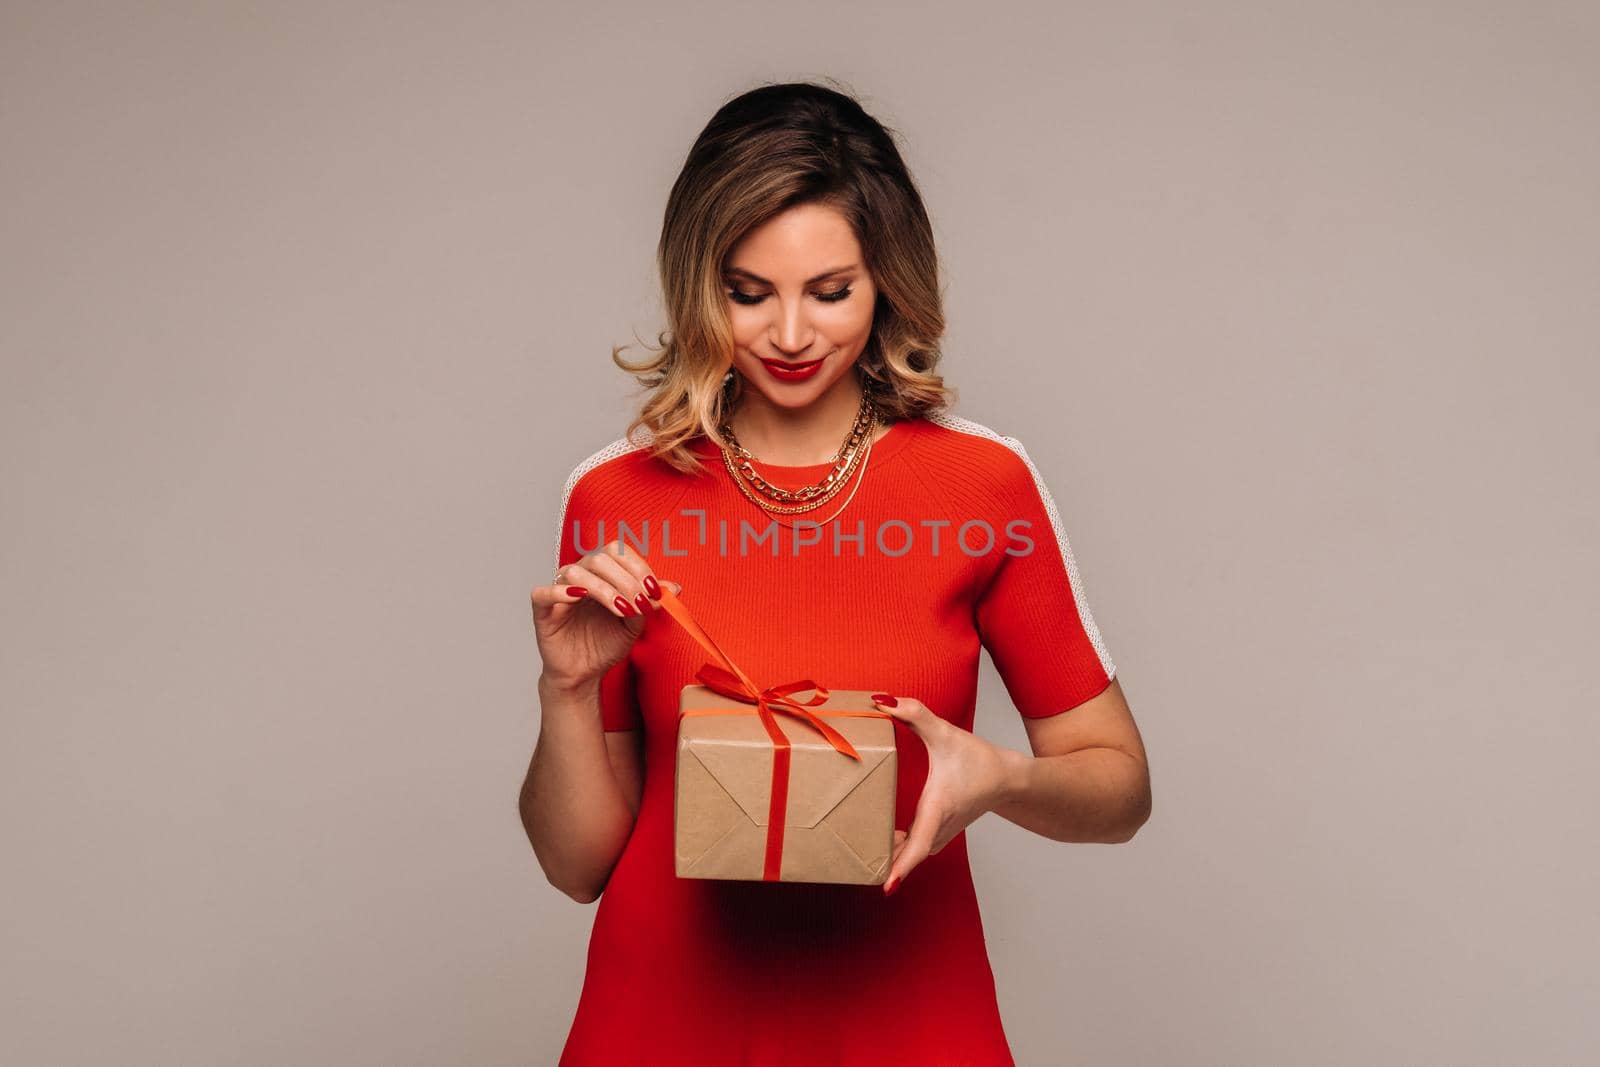 A girl in a red dress stands with gifts in her hands on a gray background.